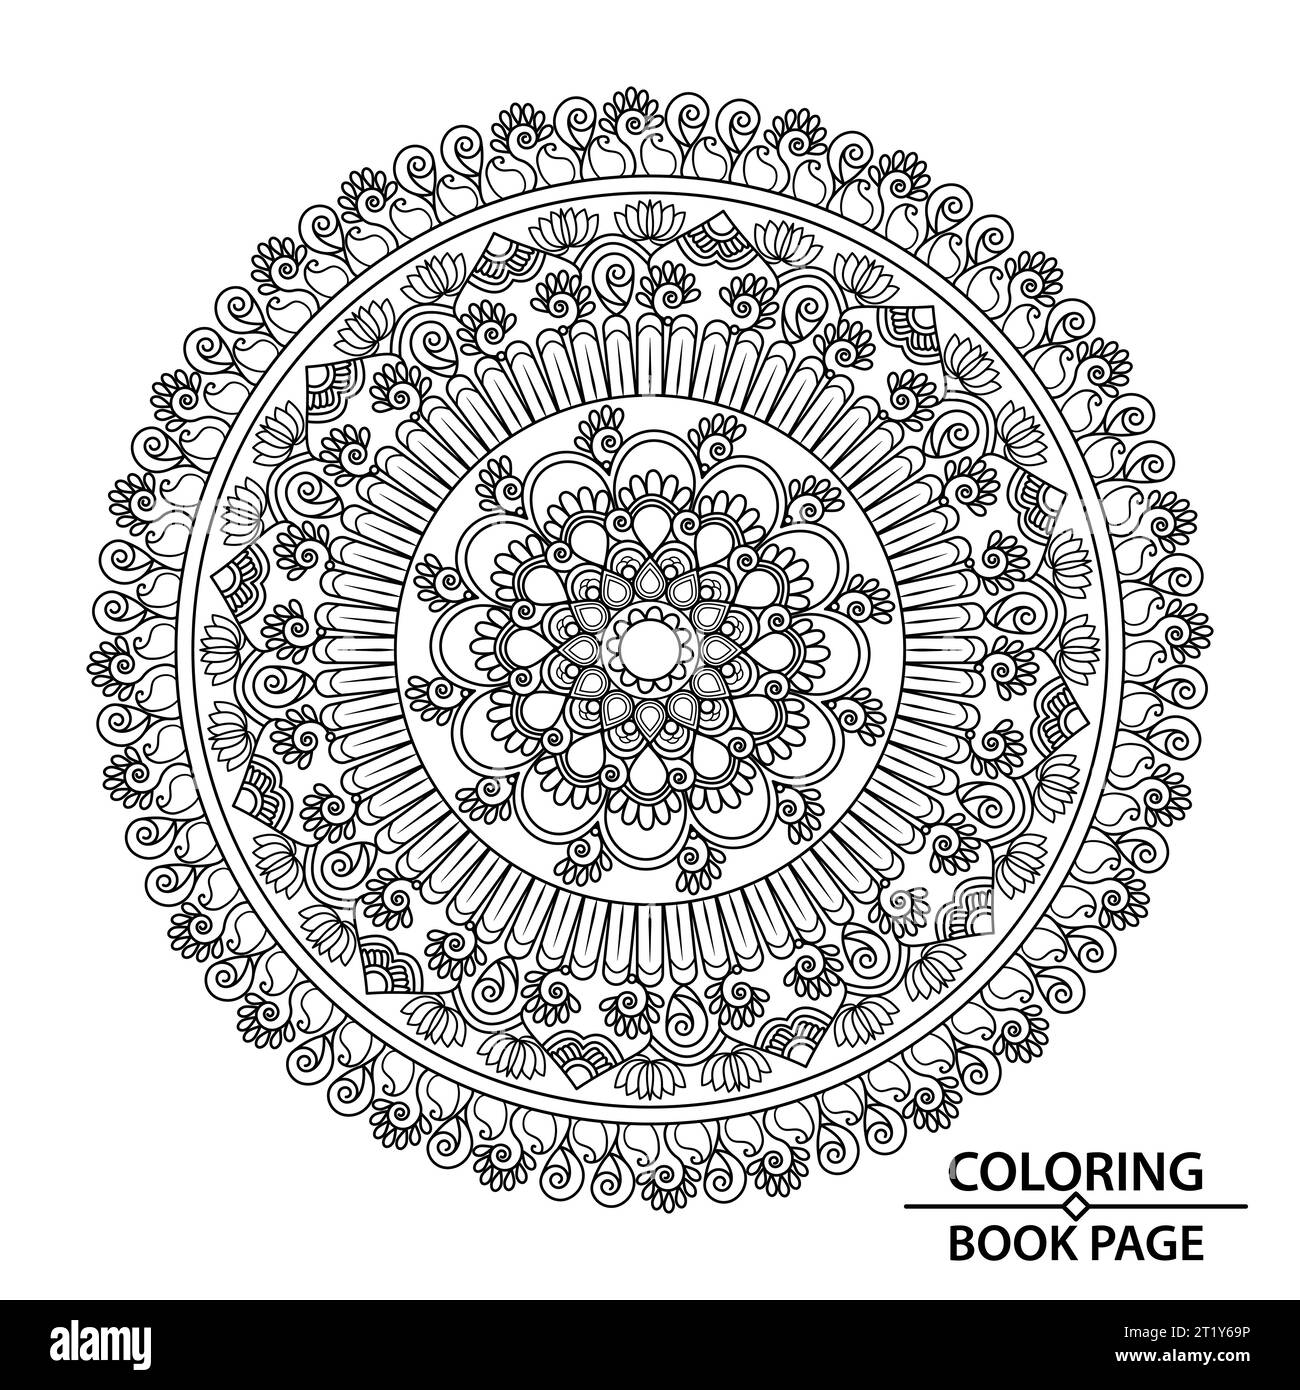 Mandalas for Relaxation and Meditation Coloring Book Page Editable and Resizeable Vector File Stock Vector